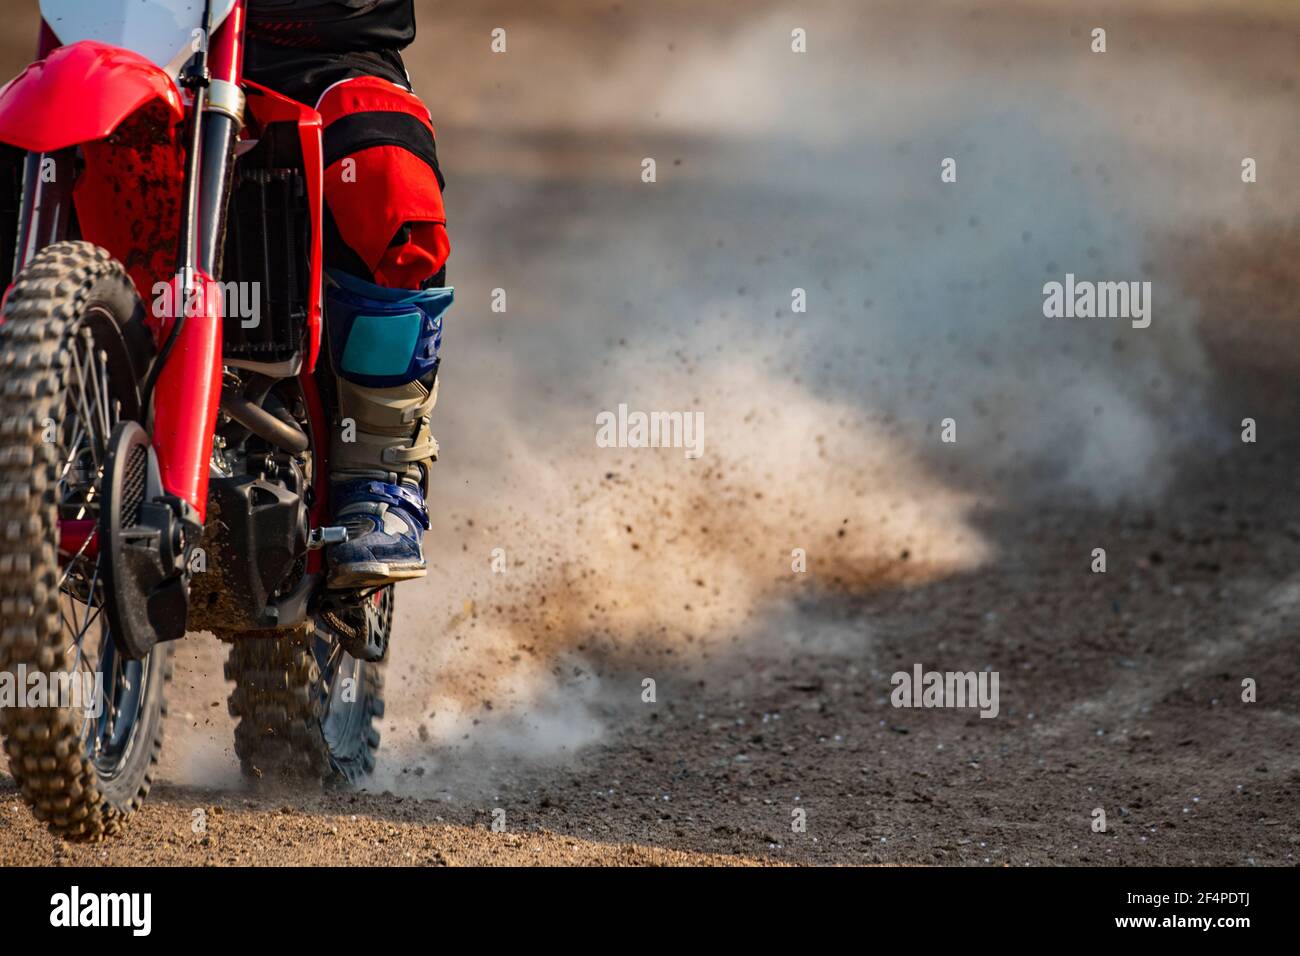 https://c8.alamy.com/comp/2F4PDTJ/close-up-of-man-riding-his-off-road-motorcycle-on-dirt-race-course-2F4PDTJ.jpg